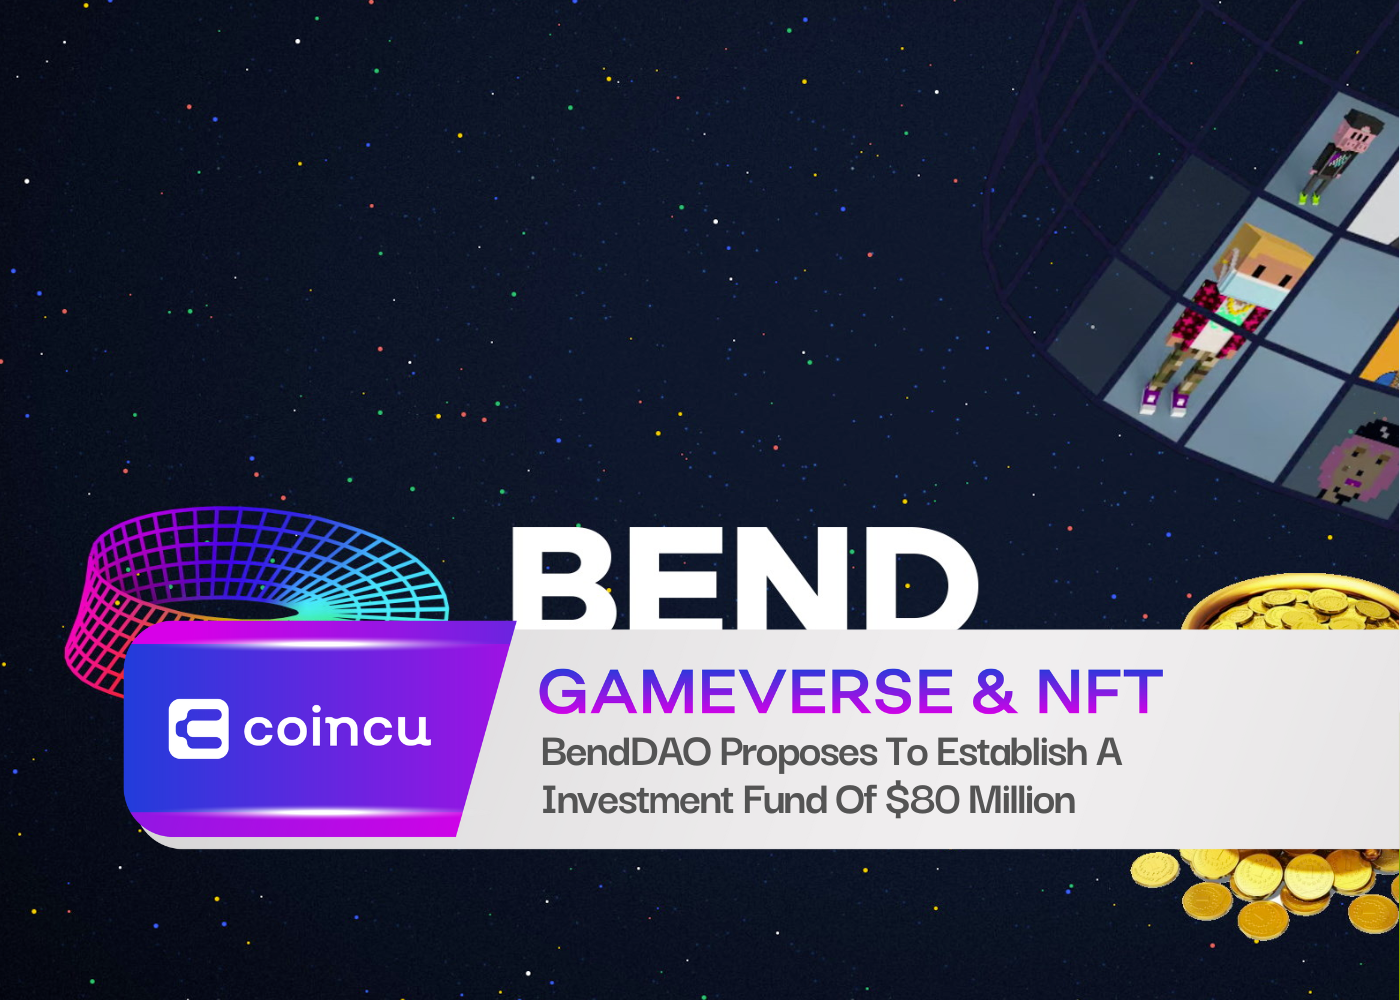 BendDAO Proposes To Establish A Investment Fund Of $80 Million